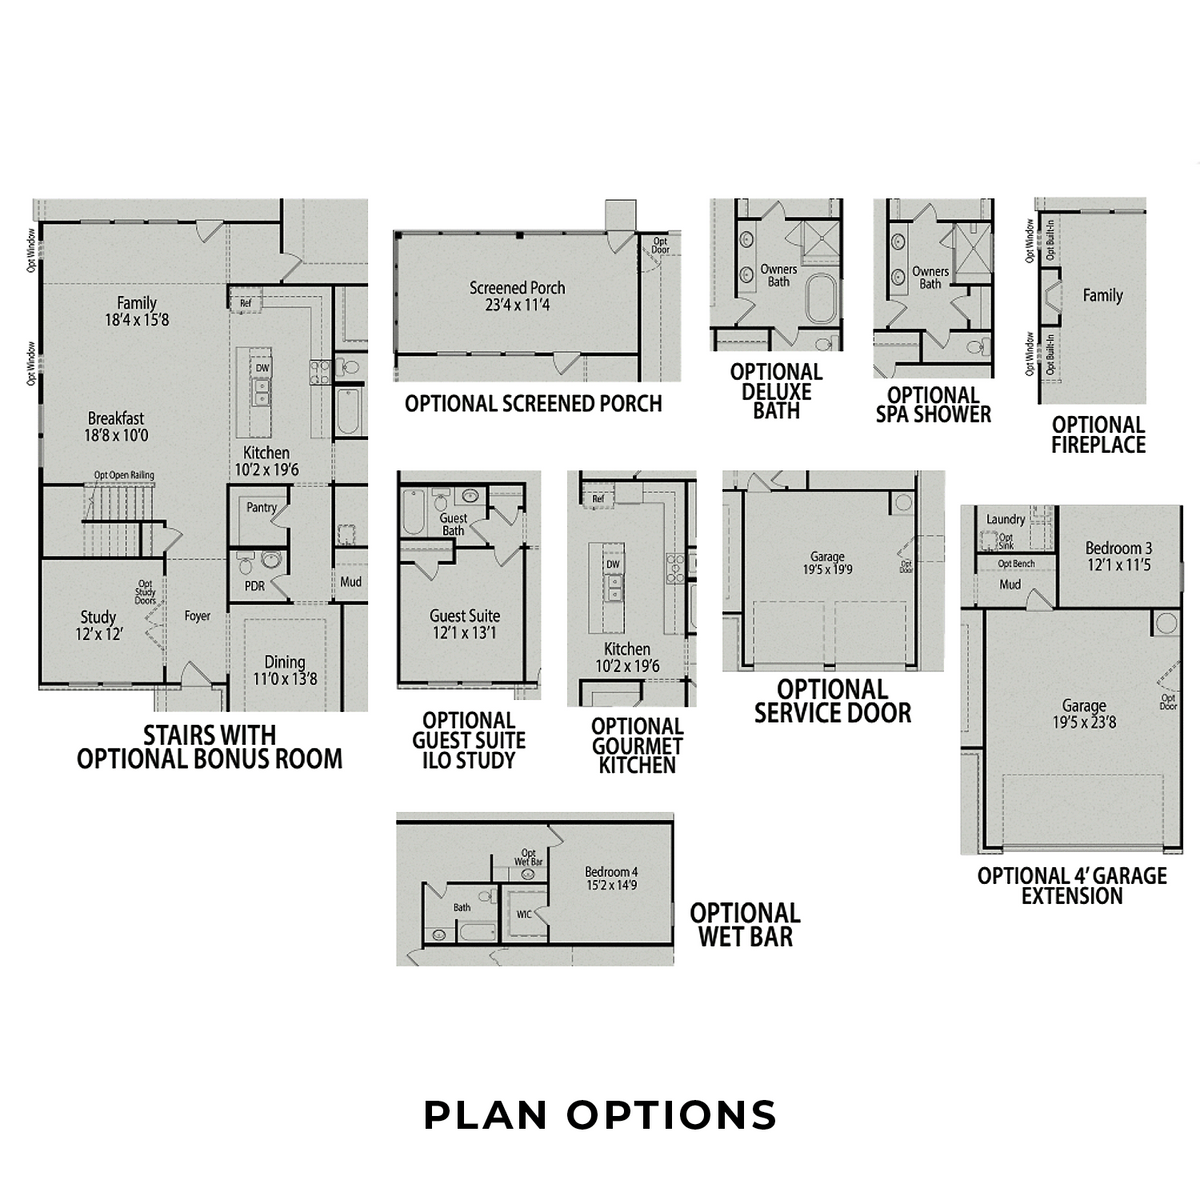 3 - The Magnolia A buildable floor plan layout in Davidson Homes' Glenmere community.